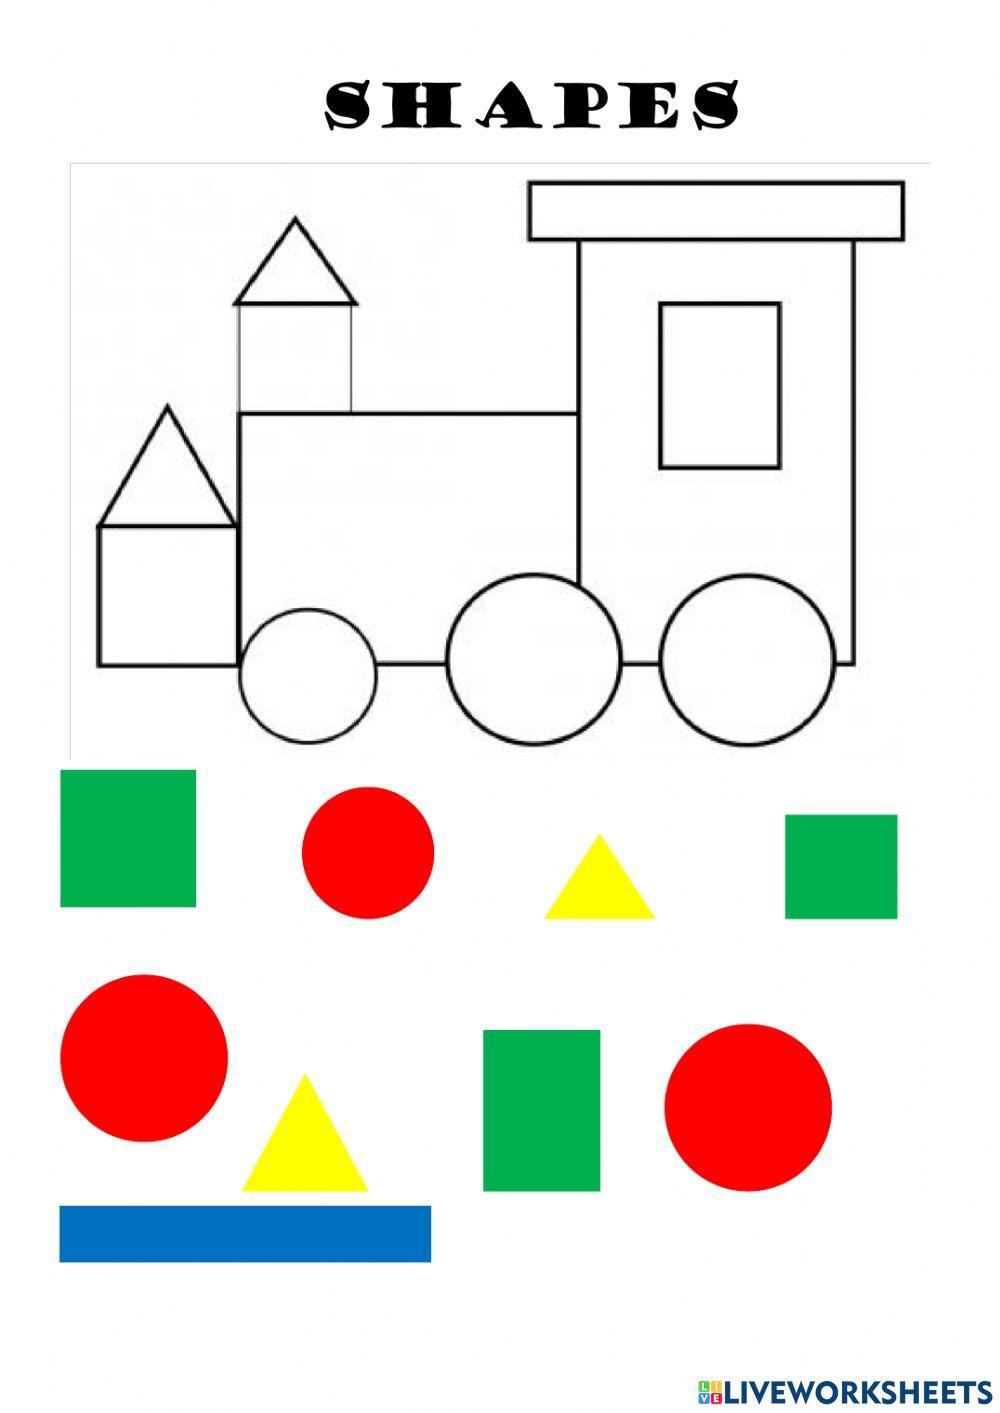 Draw Using Shapes